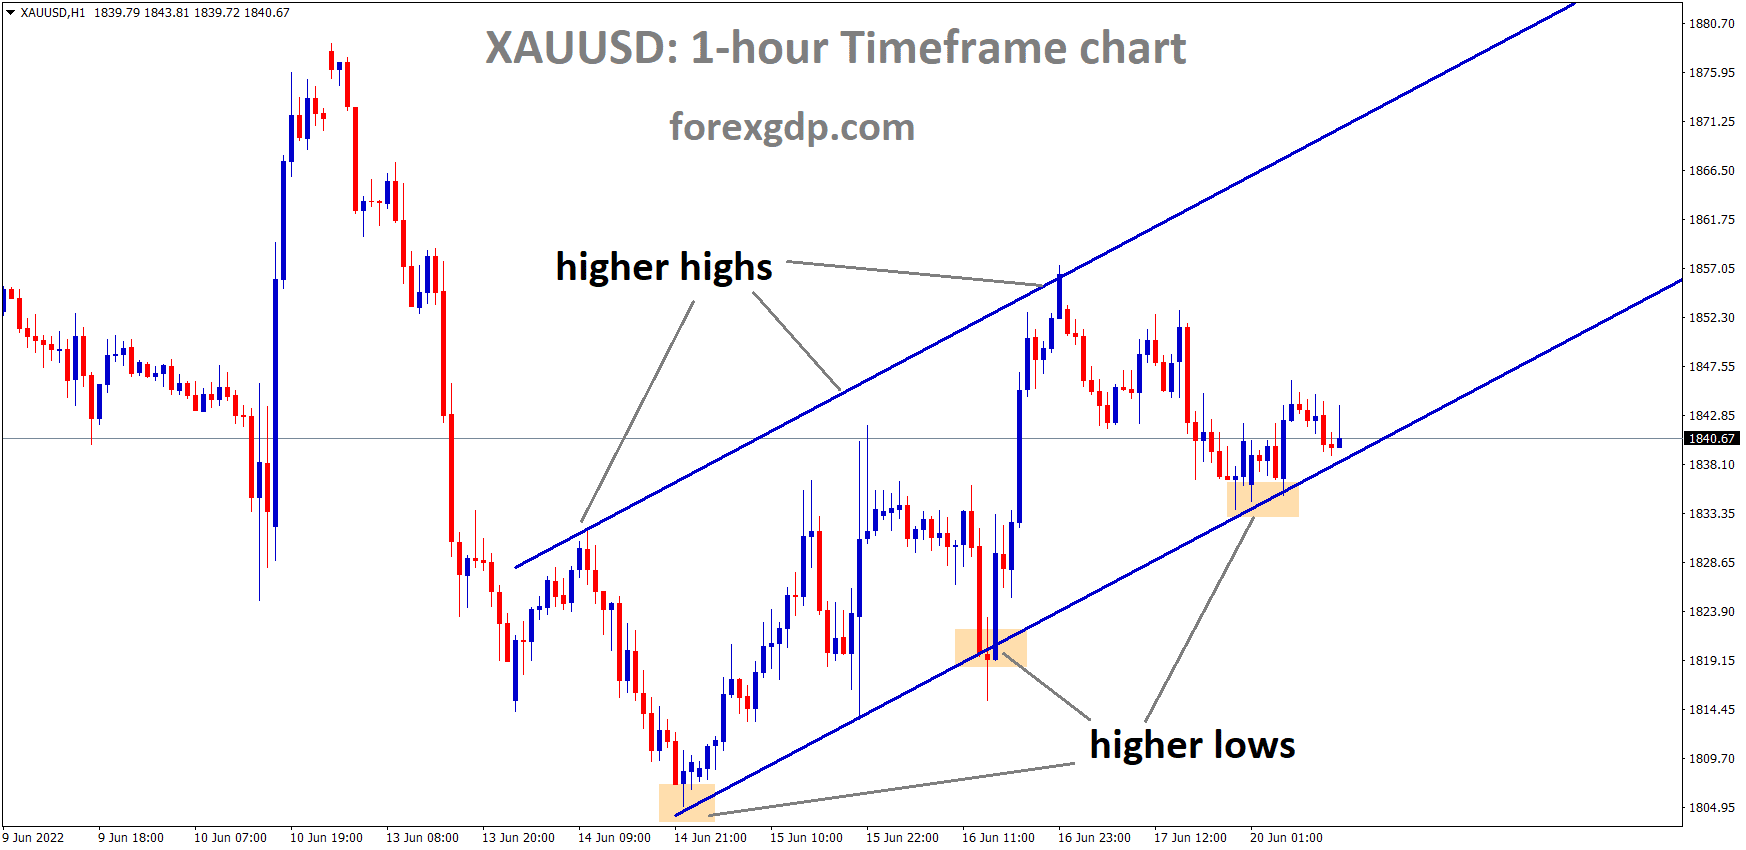 XAUUSD Gold price is moving in an Ascending channel and the Market has reached the higher low area of the Pattern.